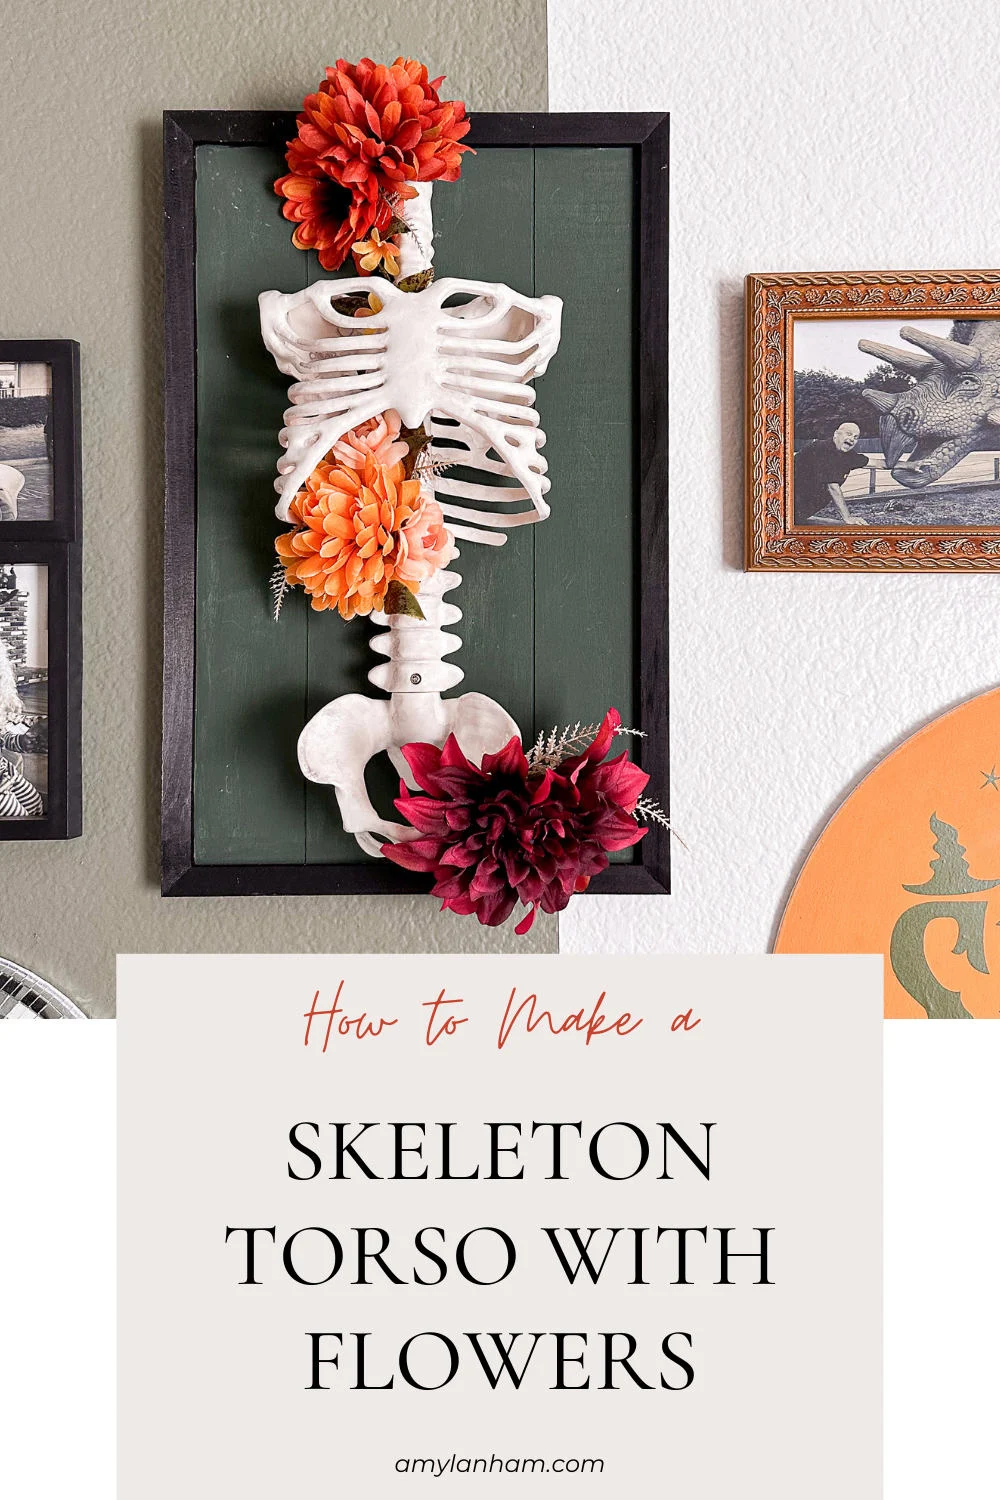 Skeleton torso on a green board with orange and red flowers